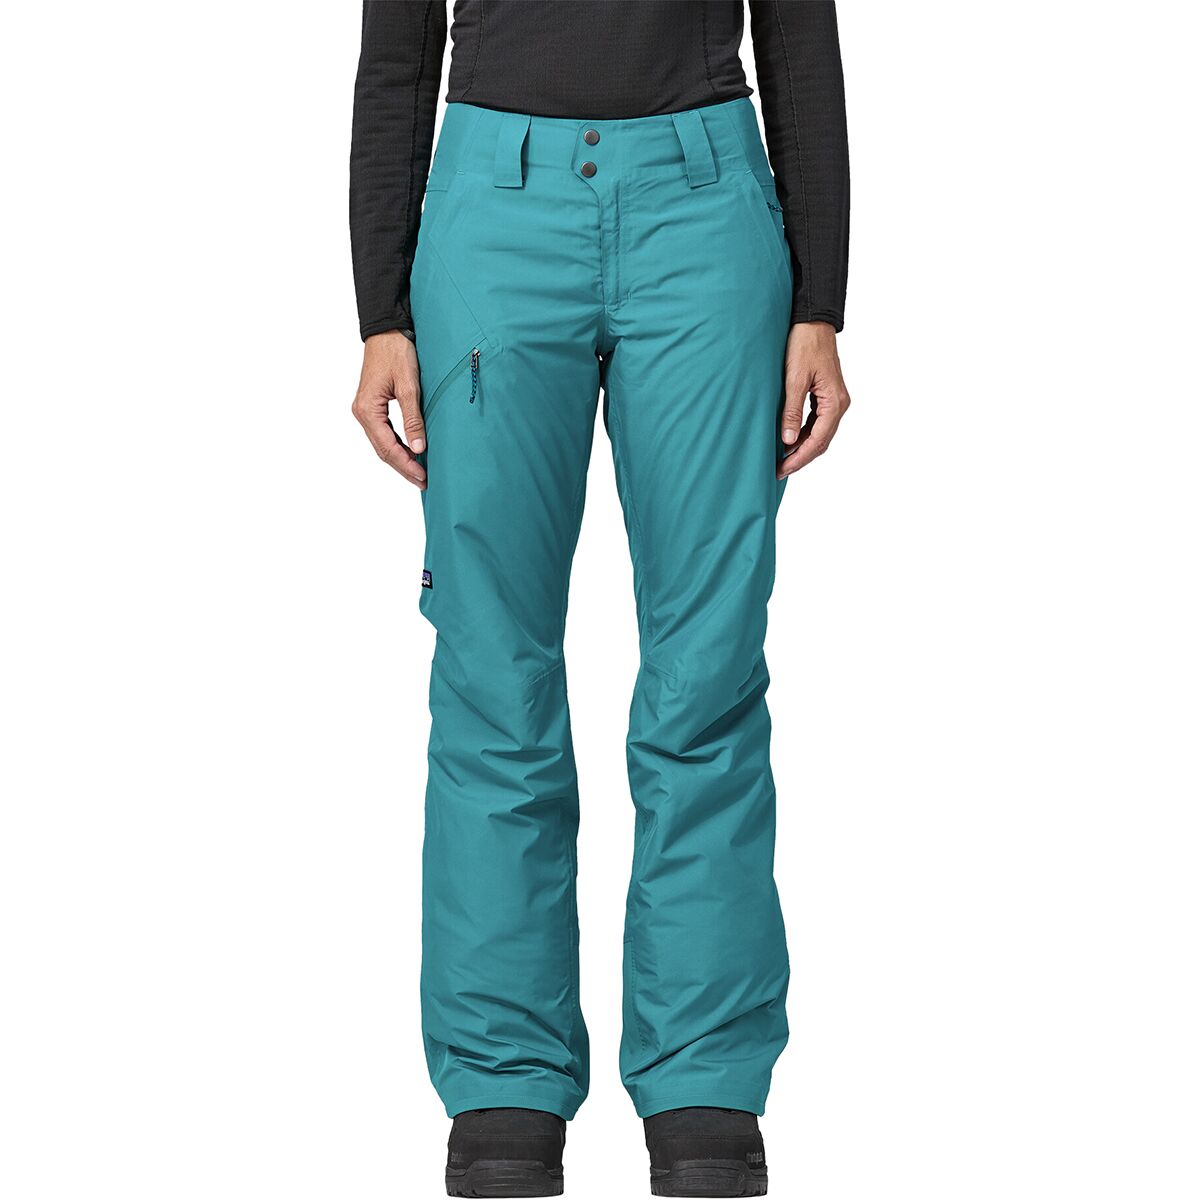 Insulated Powder Town Pant - Women